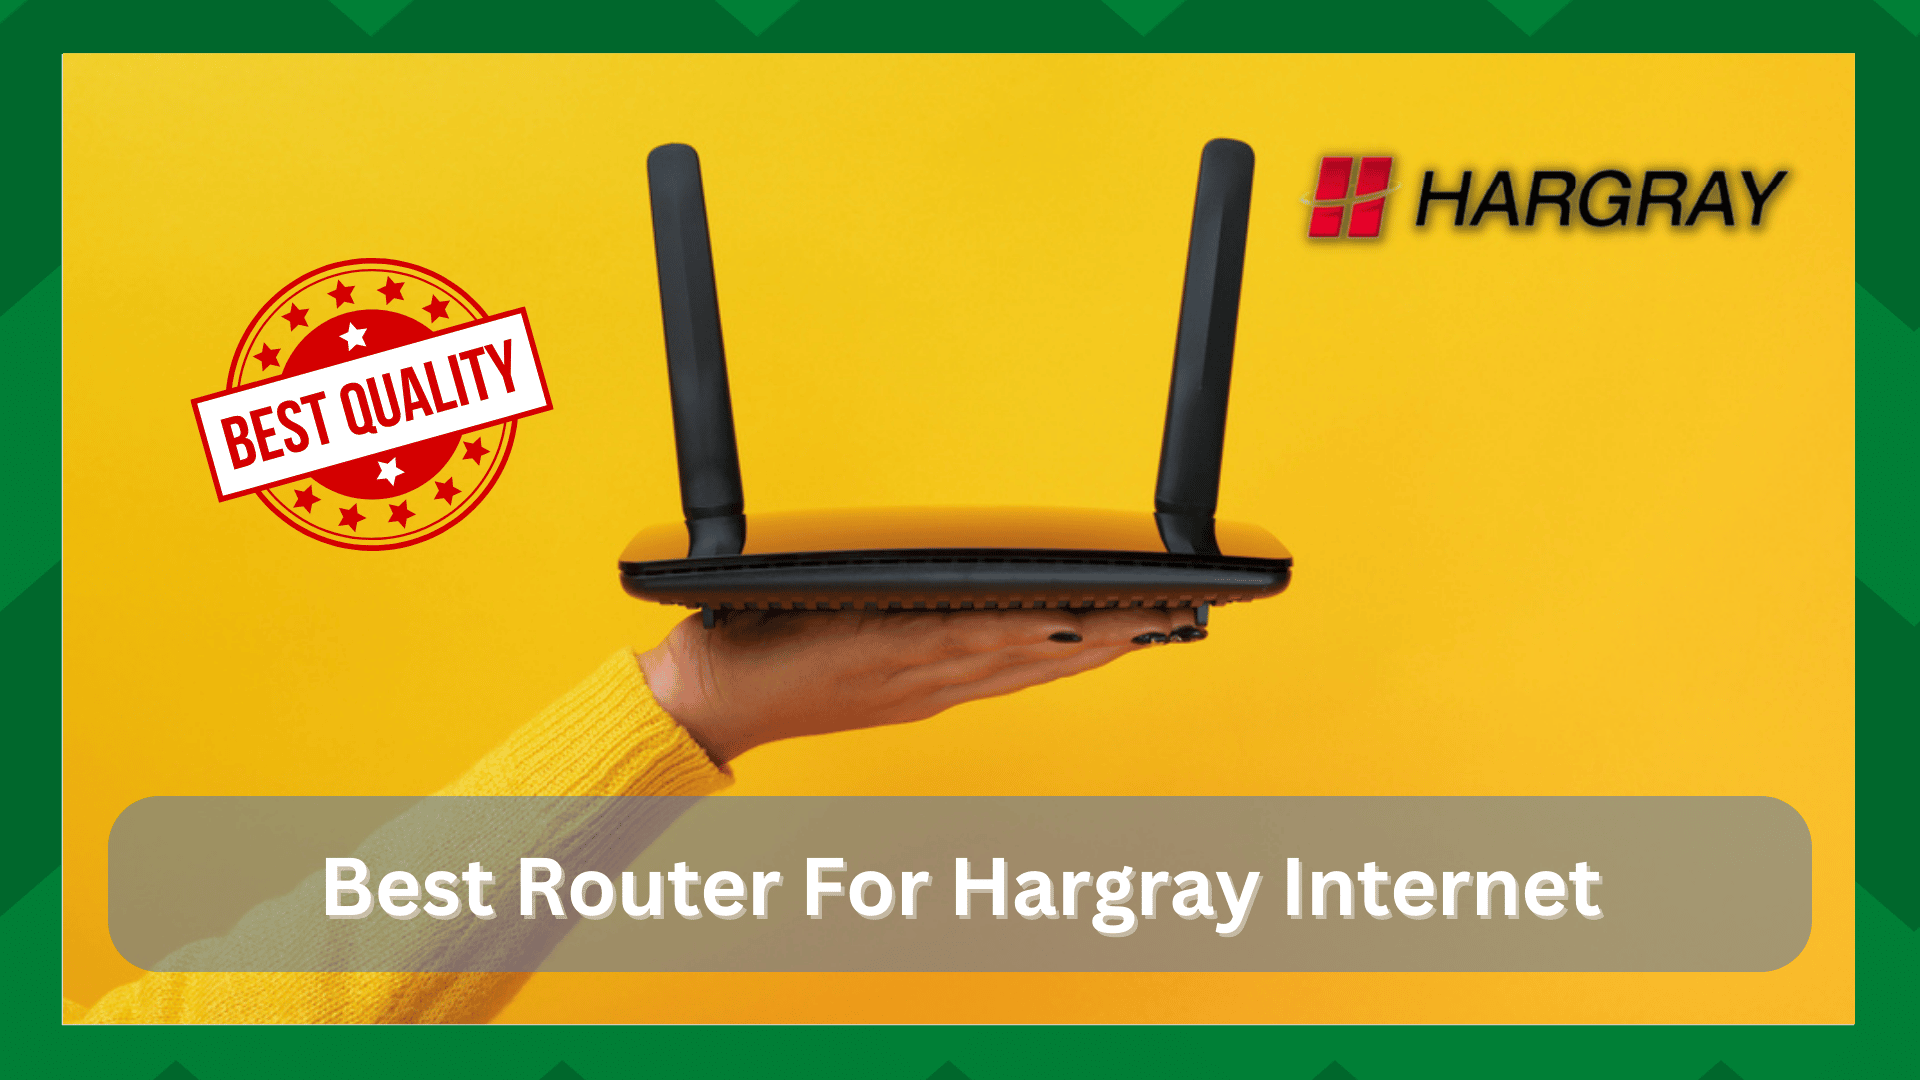 Best Router For Hargray Internet